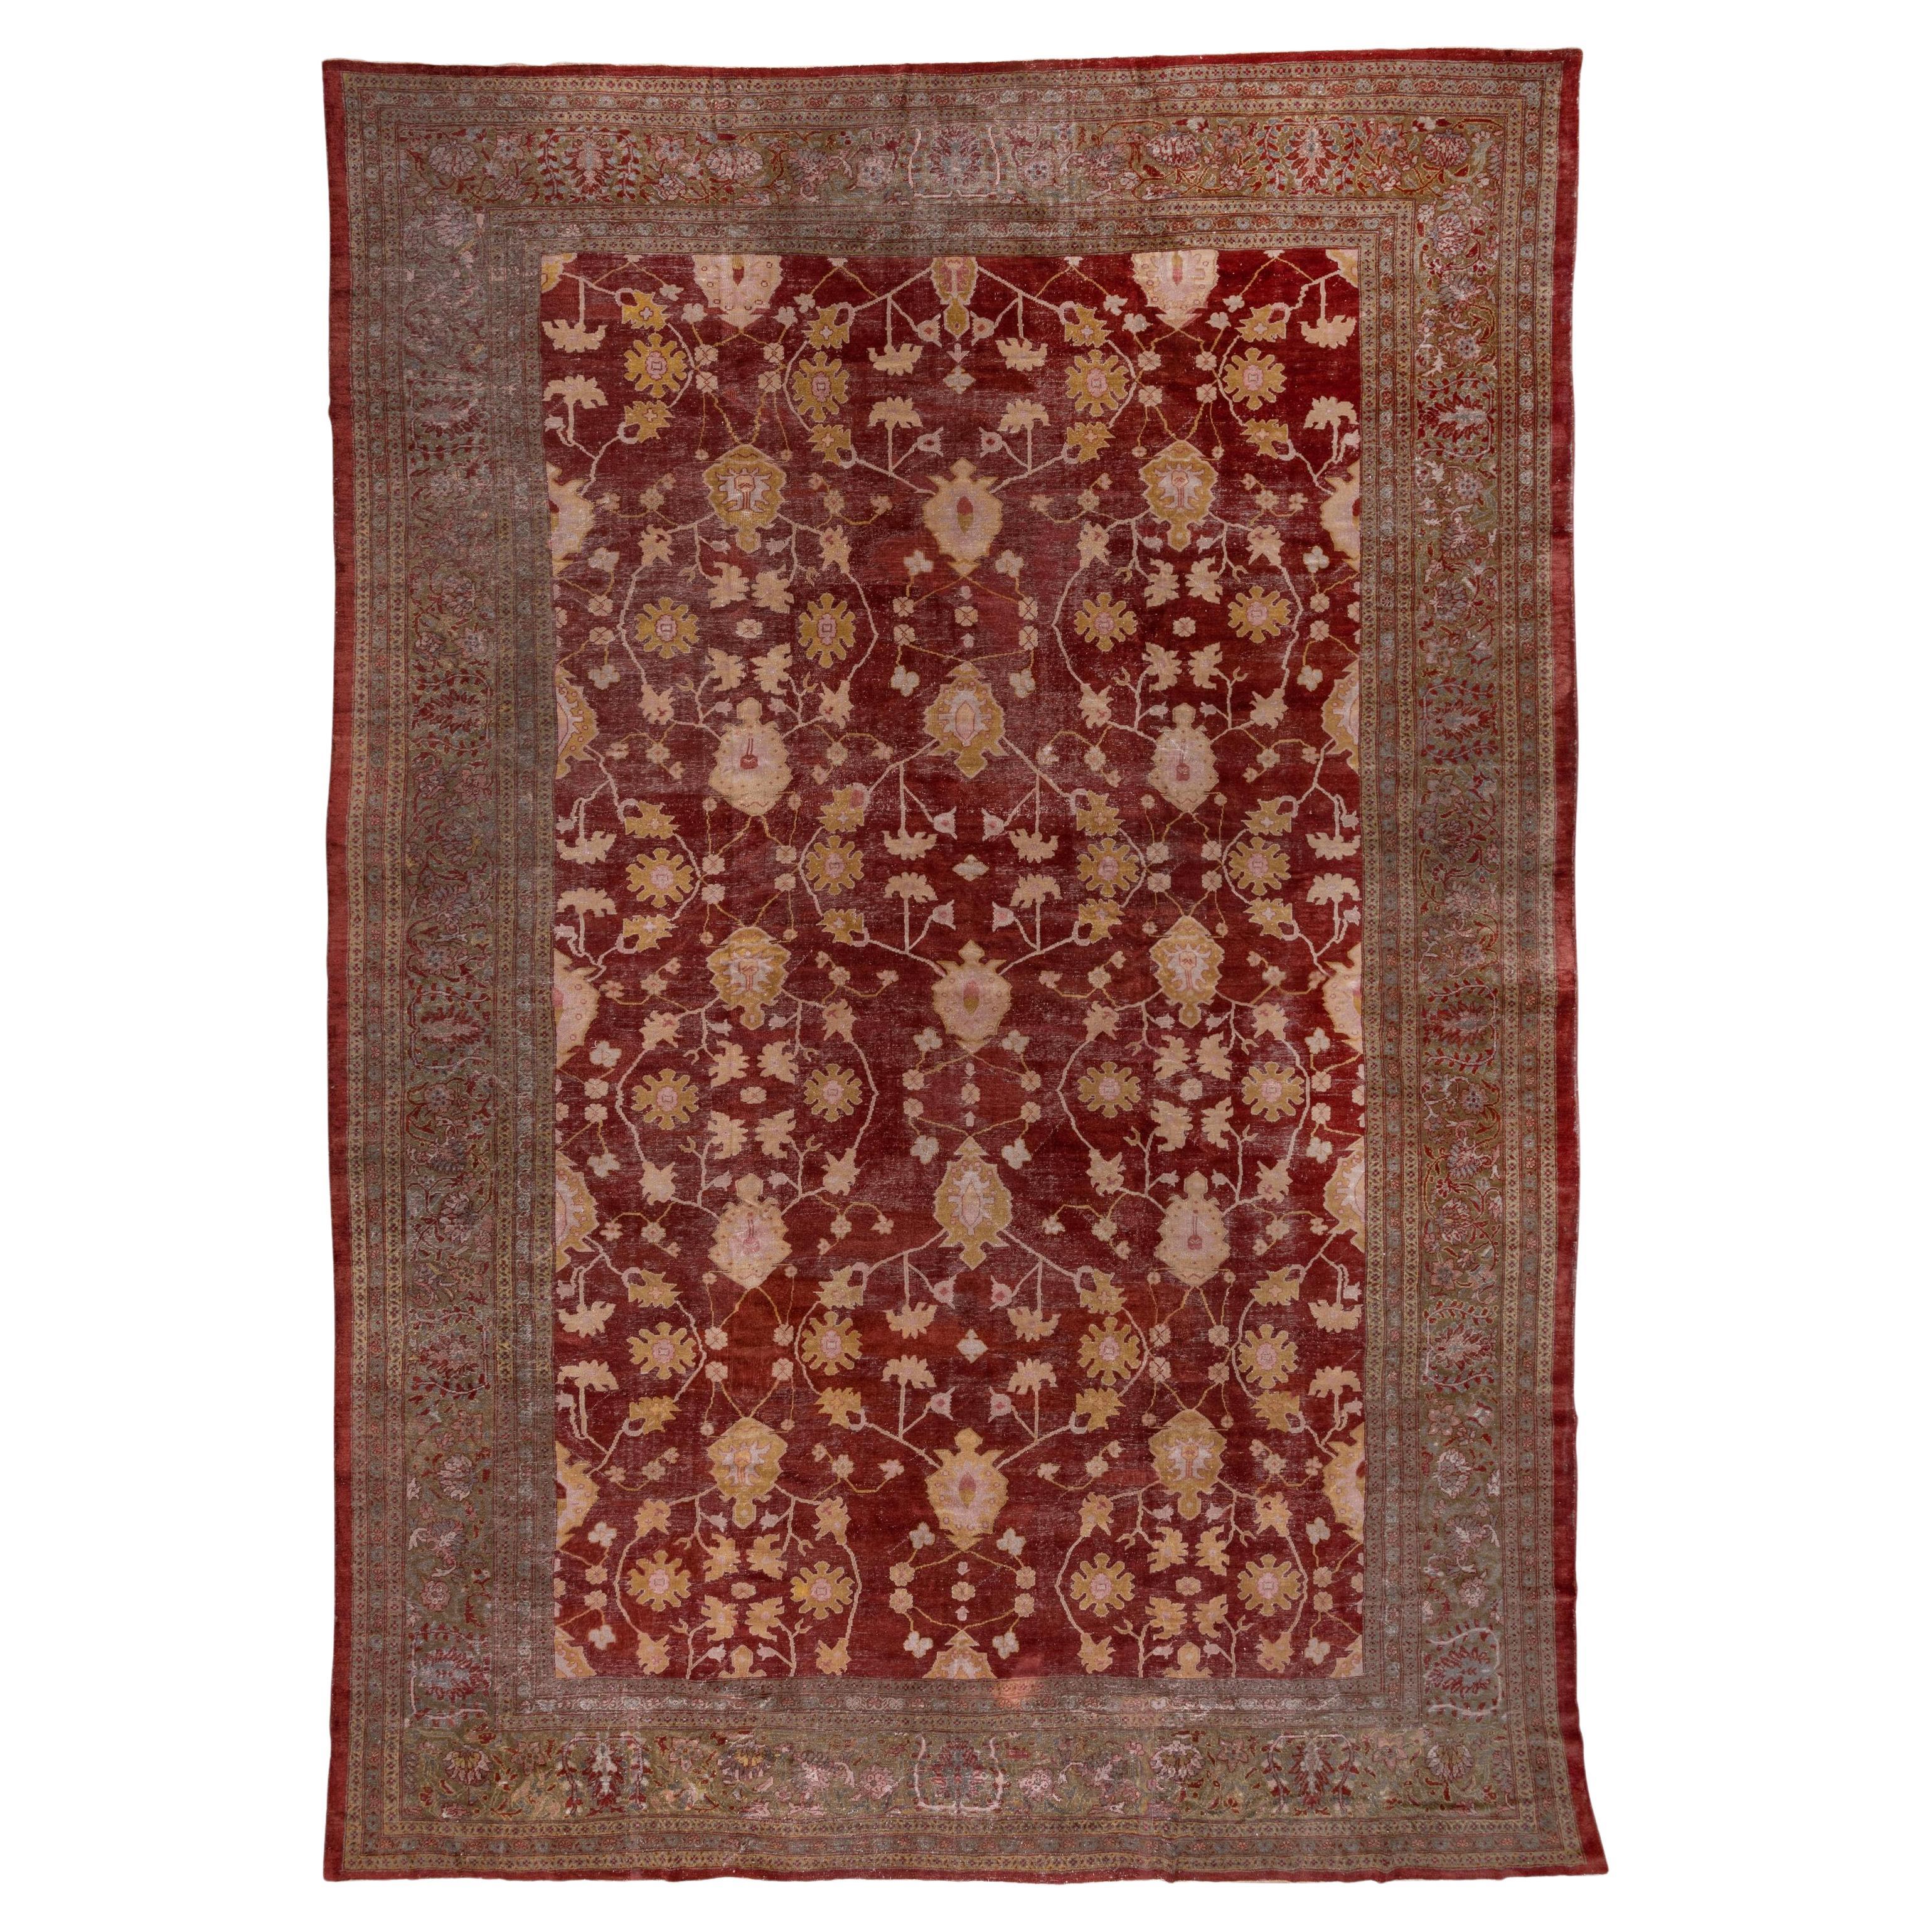 Antique Red Persian Sultanabad Mansion Carpet, circa 1910s For Sale